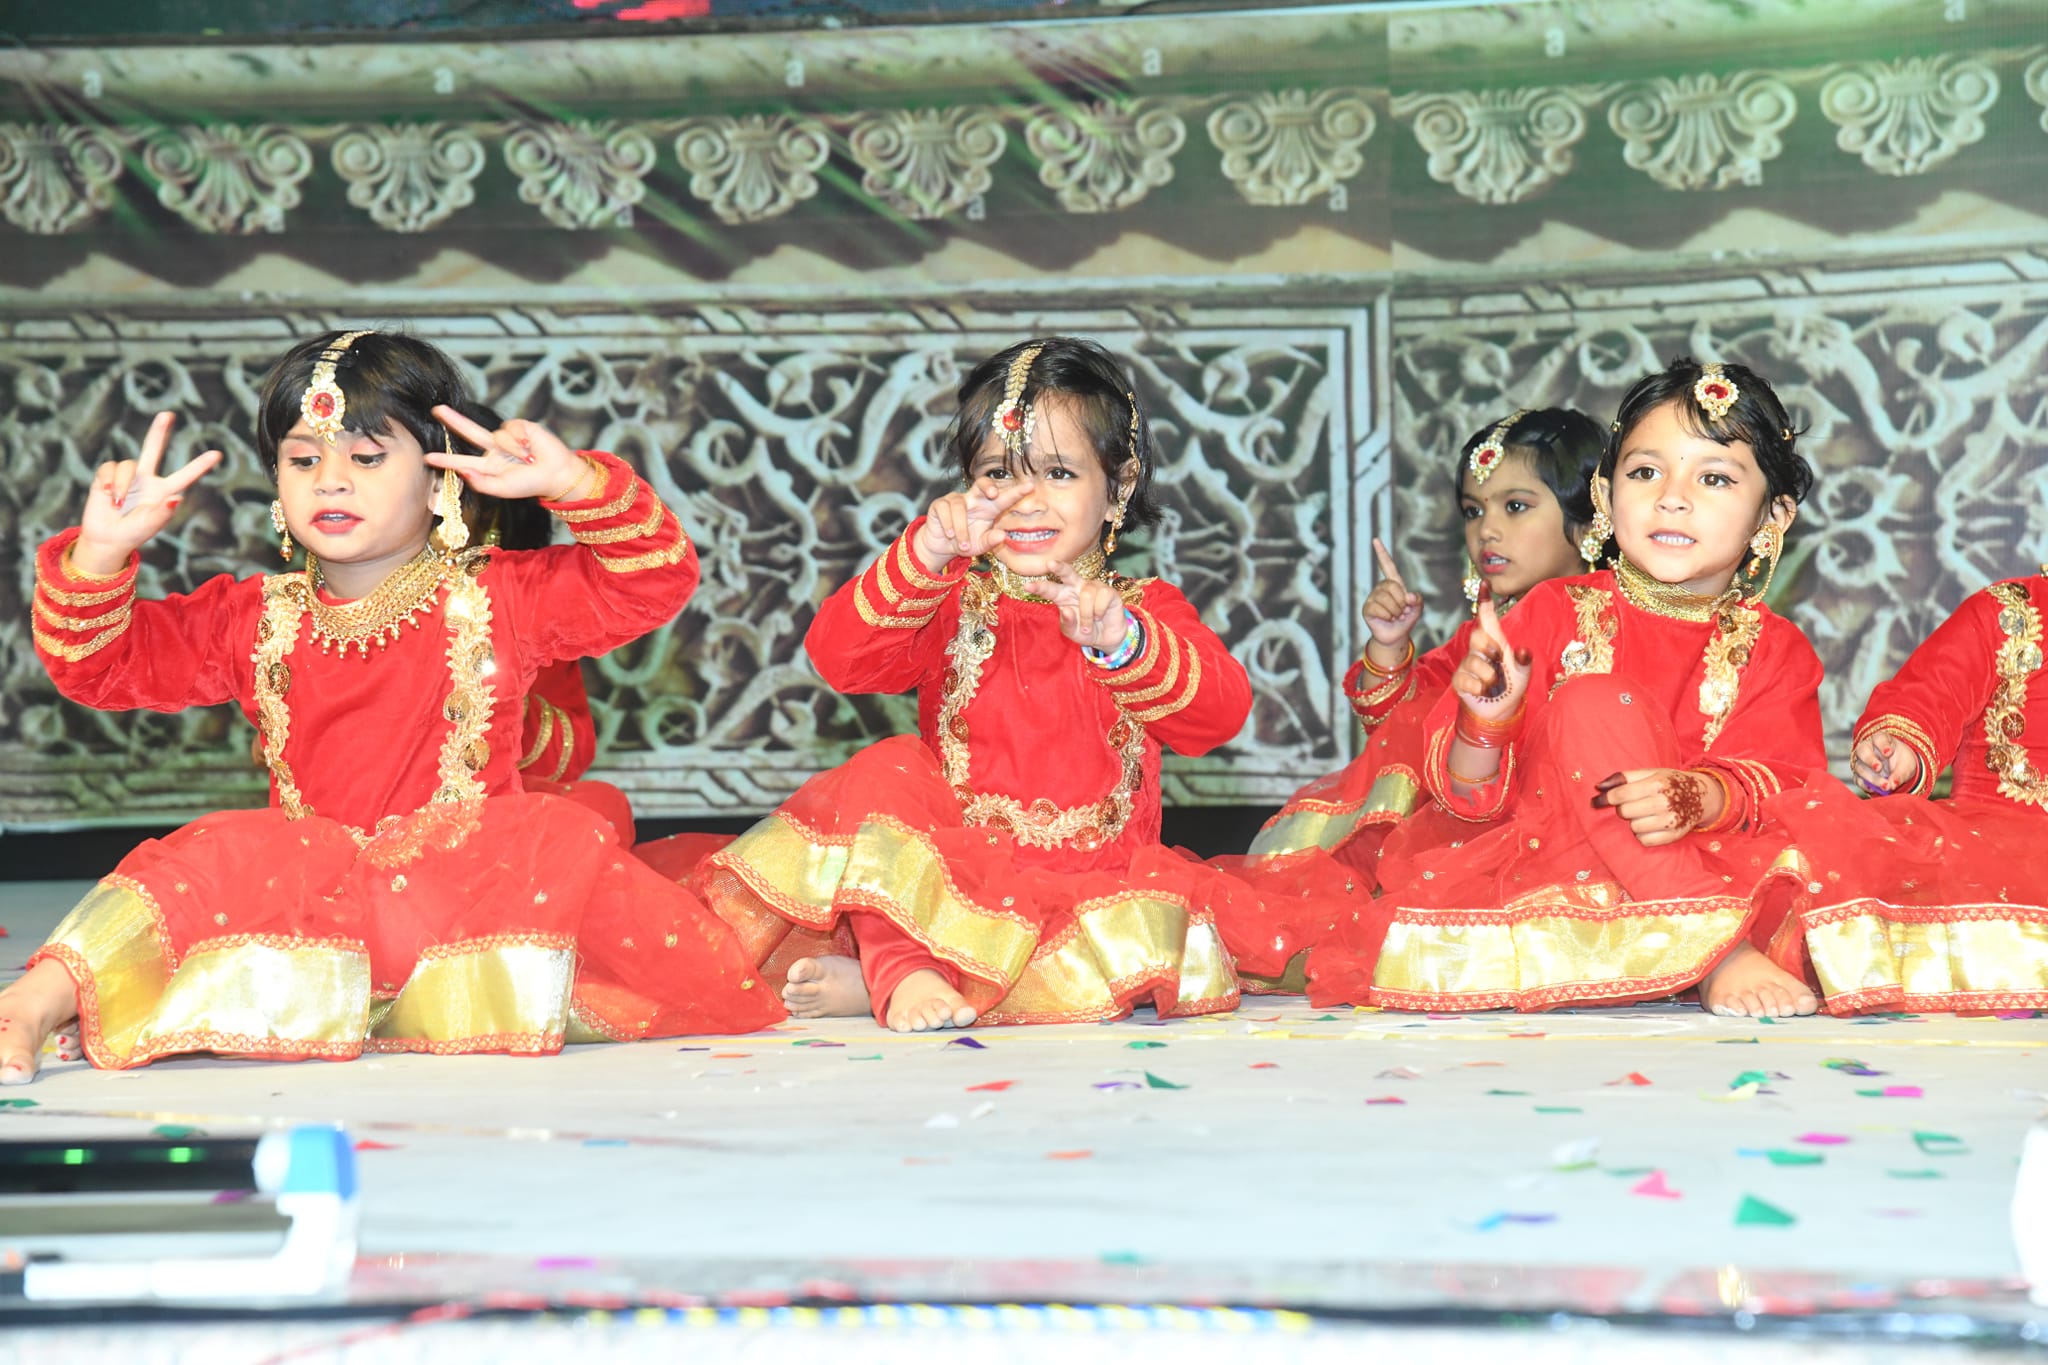 DANCE PERFORMANCE BY PRE-PRIMARY GIRLS